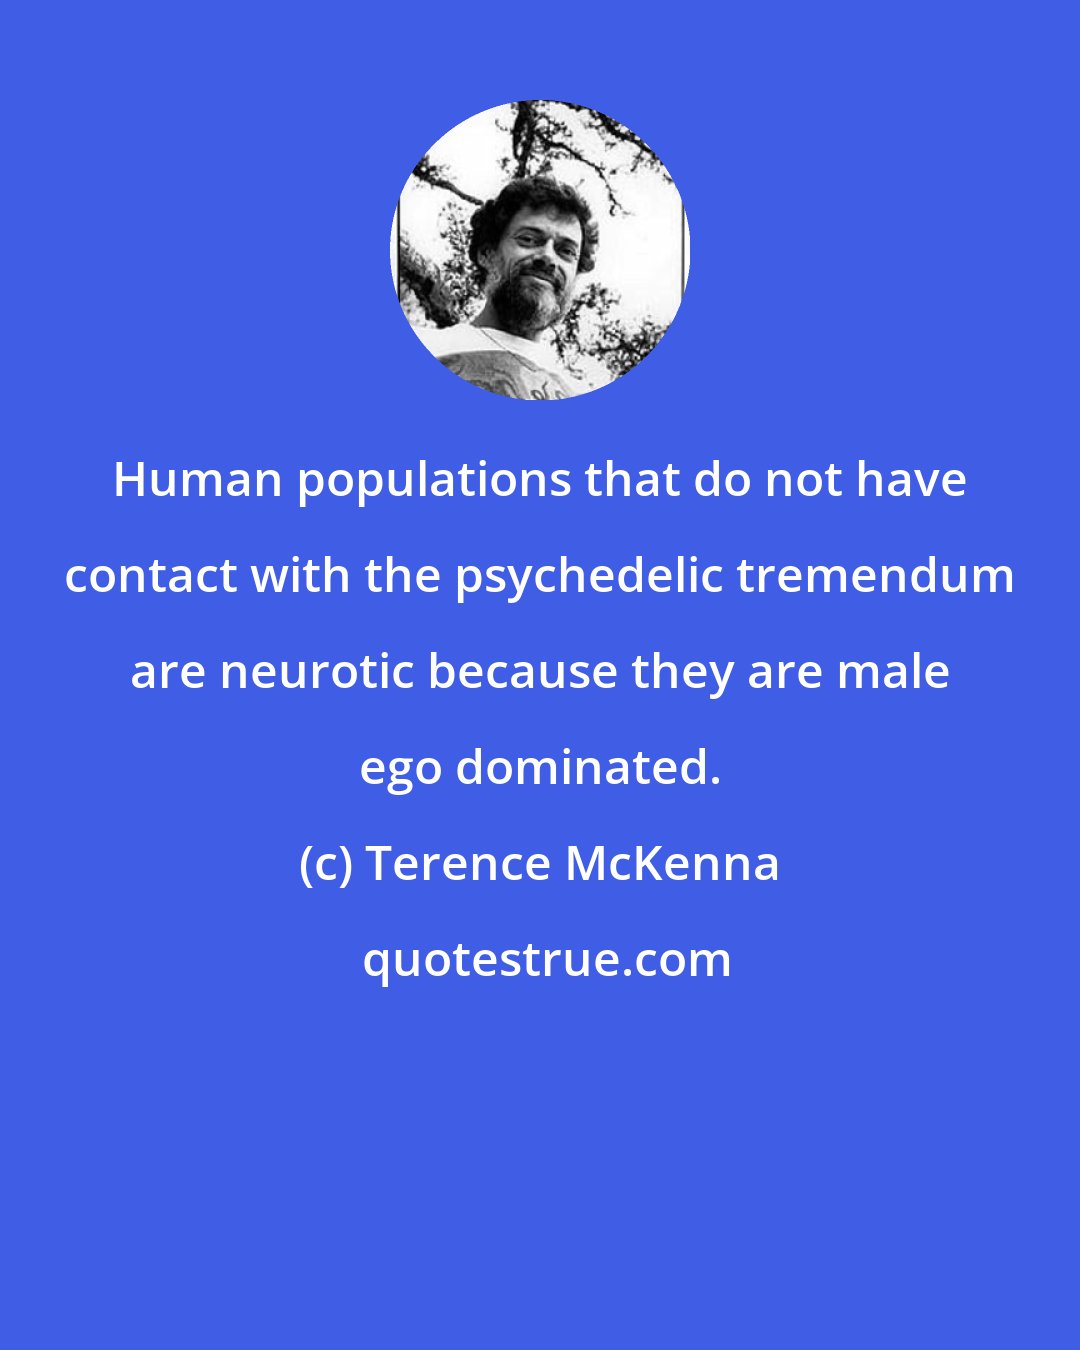 Terence McKenna: Human populations that do not have contact with the psychedelic tremendum are neurotic because they are male ego dominated.